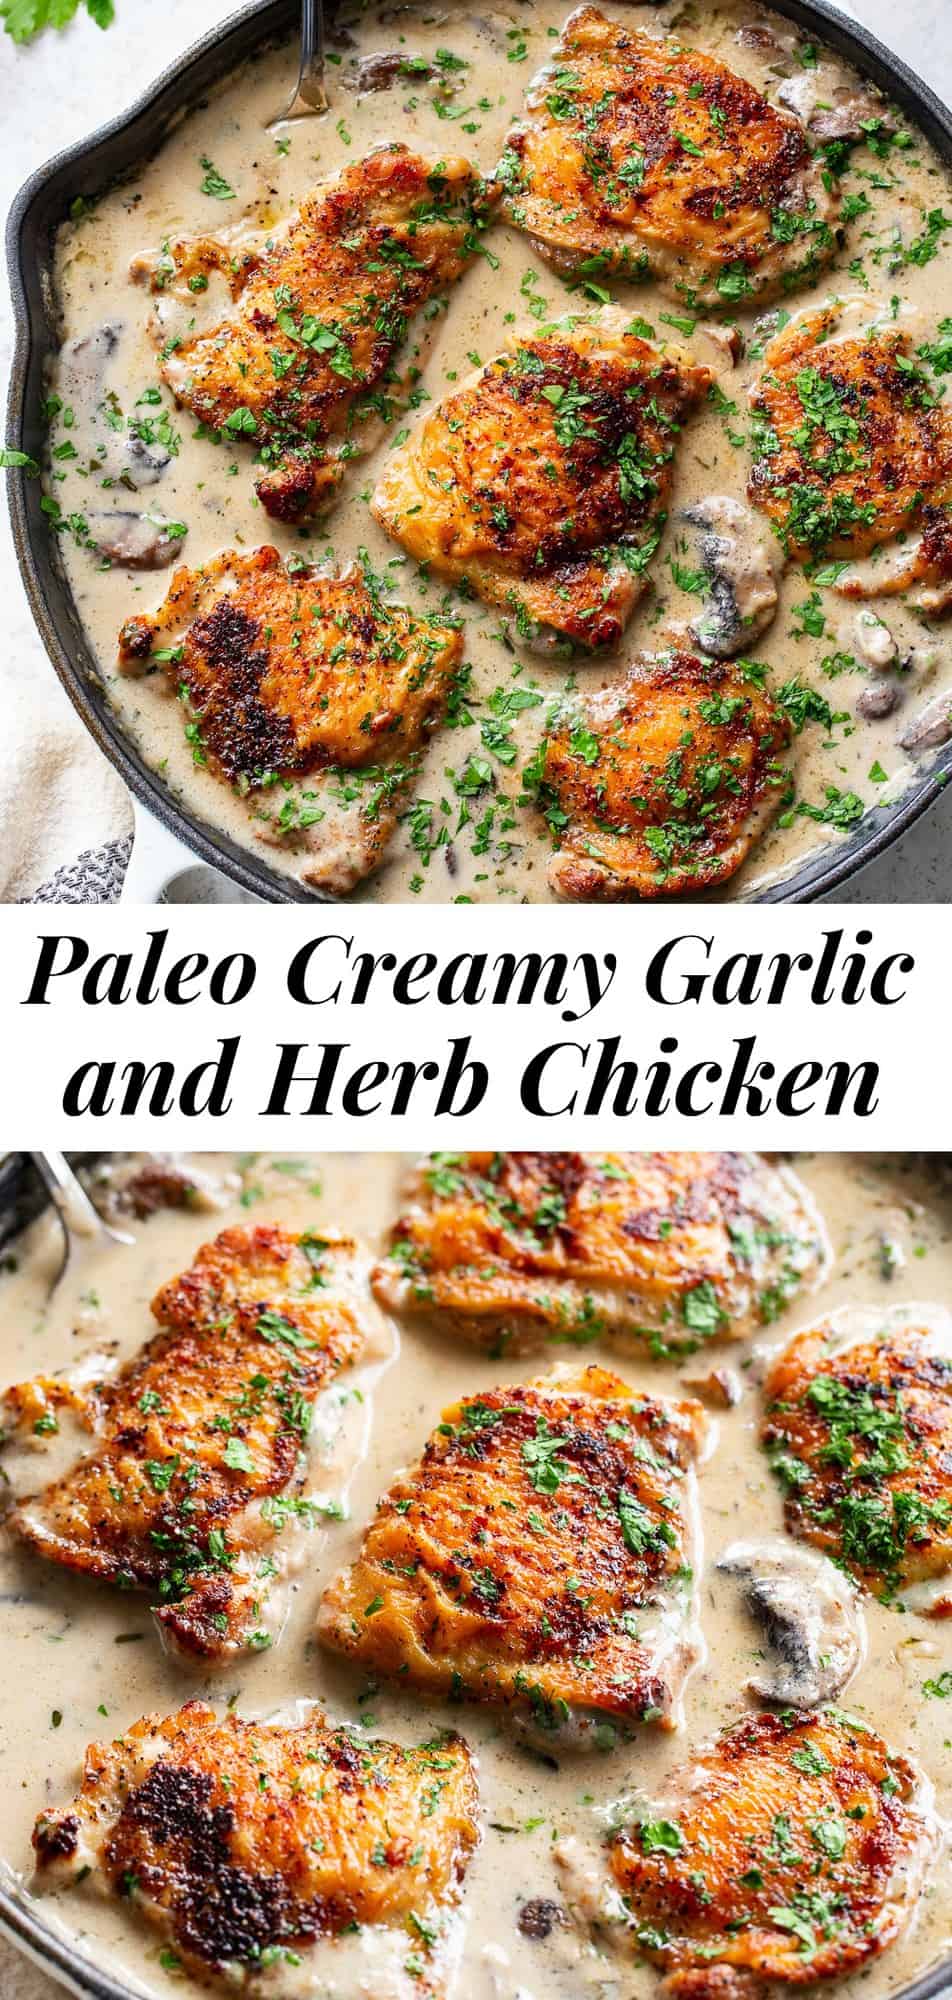 This creamy garlic herb chicken is made all in one skillet, packed with flavor, dairy free, paleo, keto and Whole30 compliant!  Seasoned crispy skinned chicken thighs with a dairy free mushroom cream sauce that’s perfect over cauliflower rice or with roasted veggies. #paleo #whole30 #cleaneating #keto #lowcarb